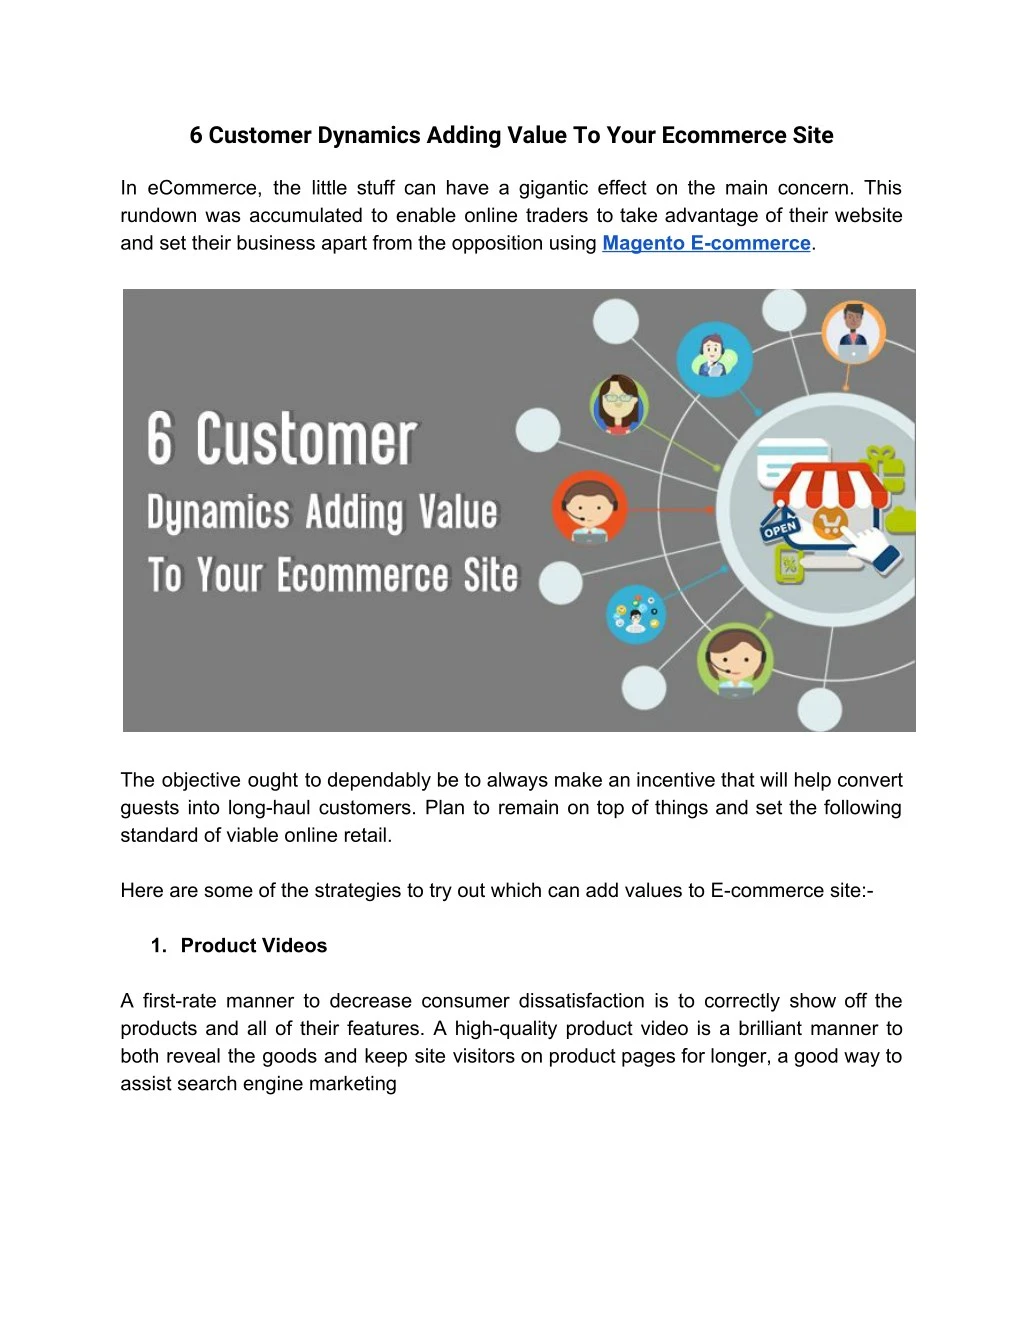 6 customer dynamics adding value to your